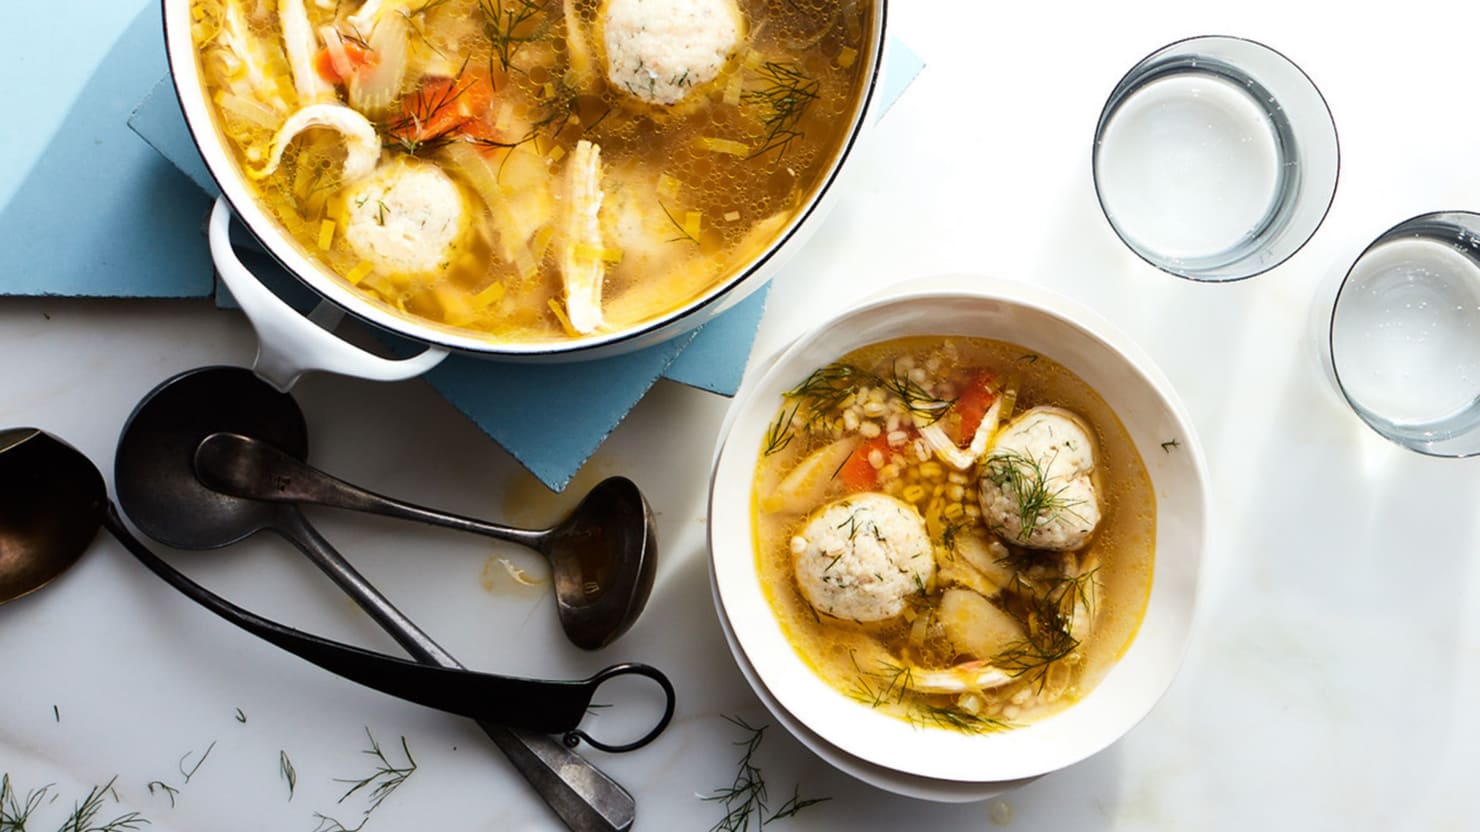 A Bowl of Gail Simmons’ Matzo Ball Soup Will Treatment What Ails You